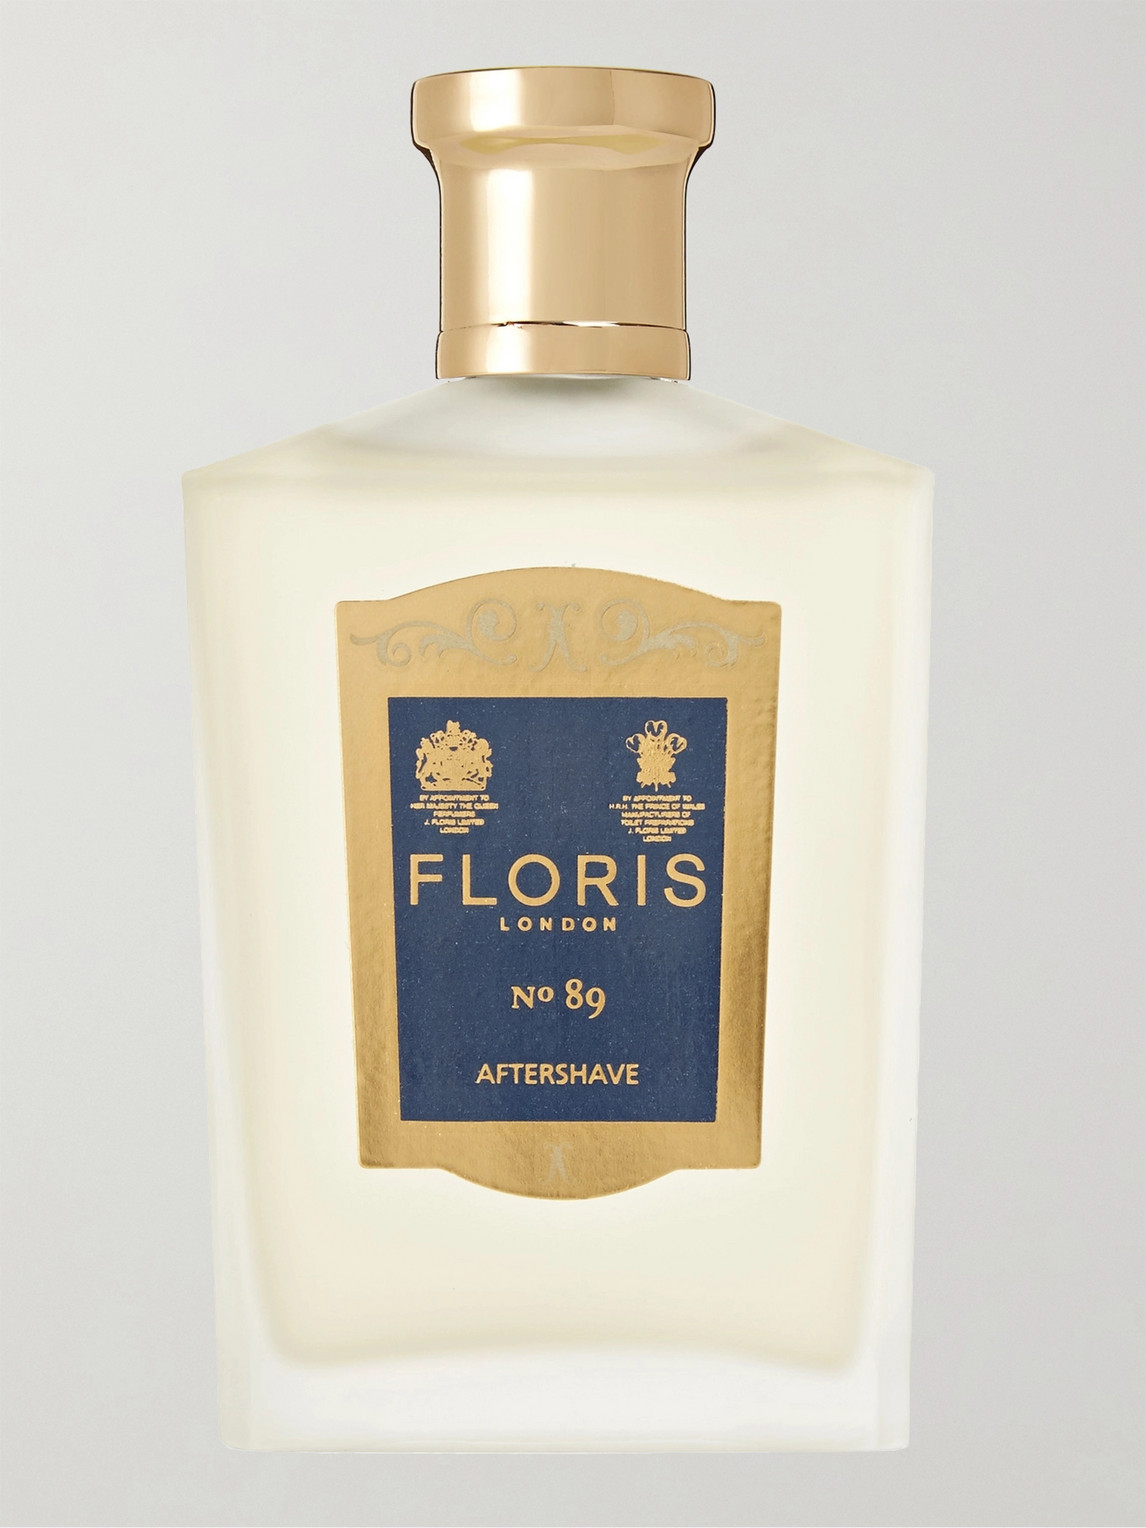 Floris London No. 89 Aftershave, 100ml In Colorless